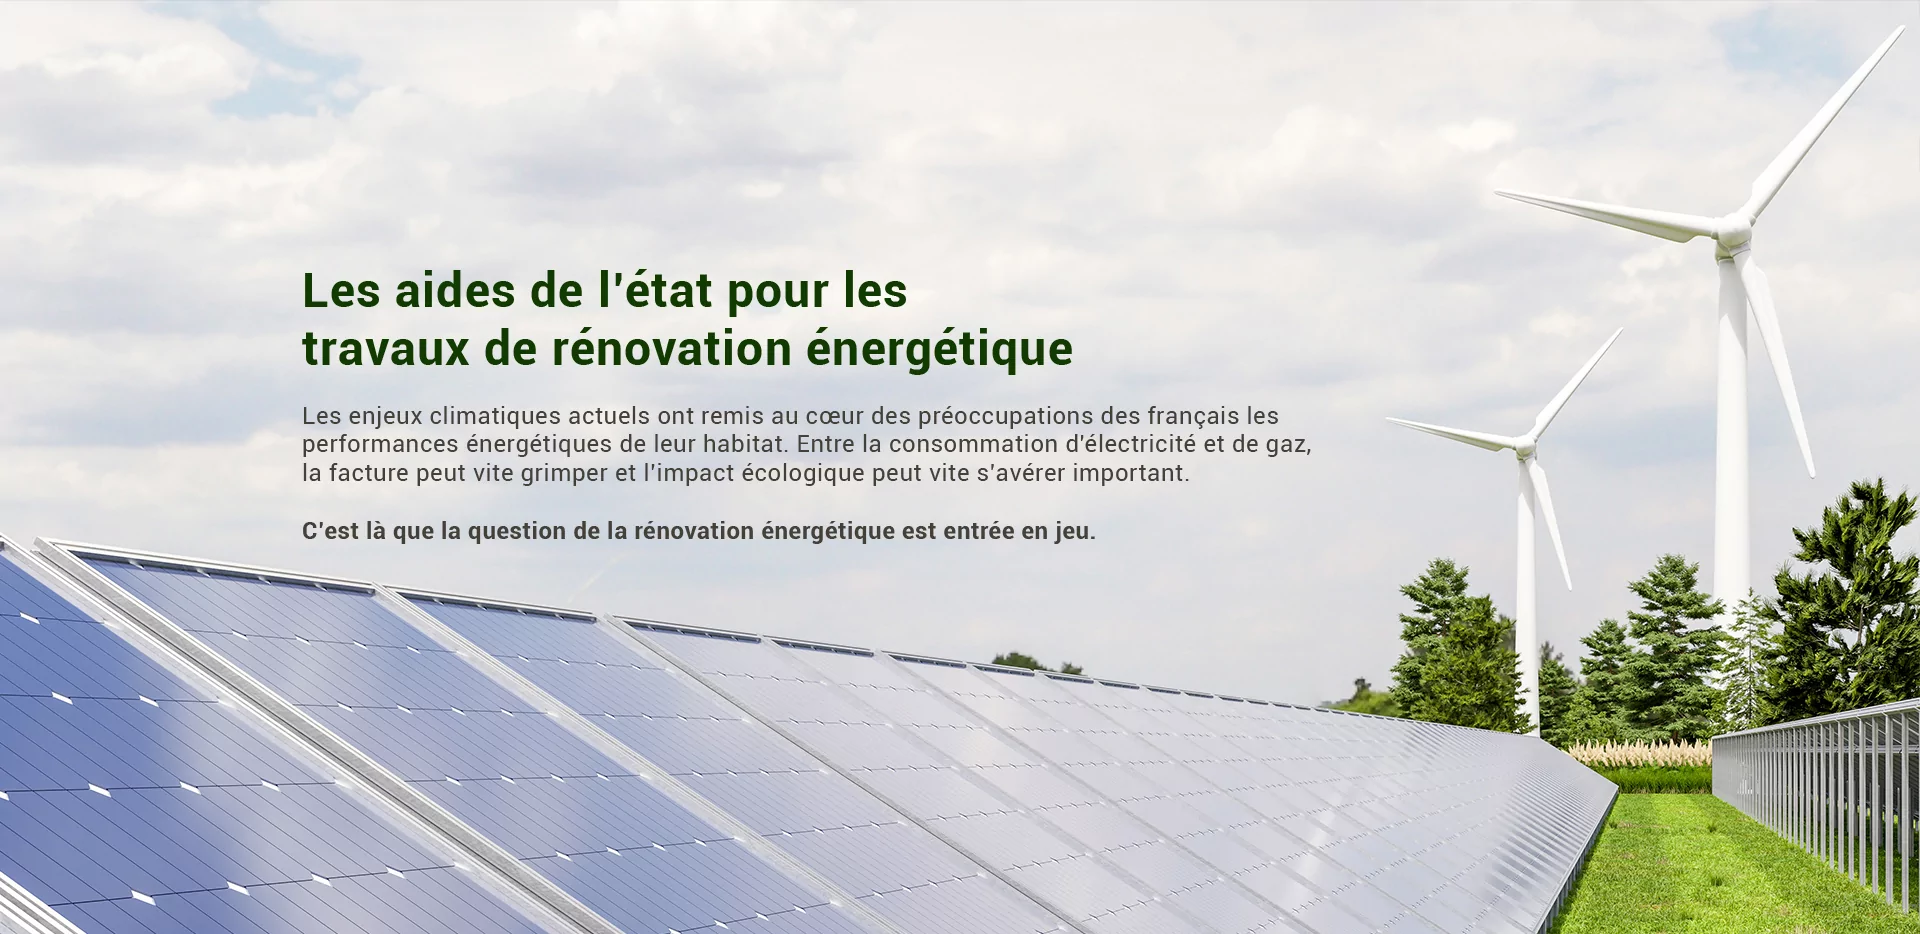 Installation Panneaux Solaires Othis 77280